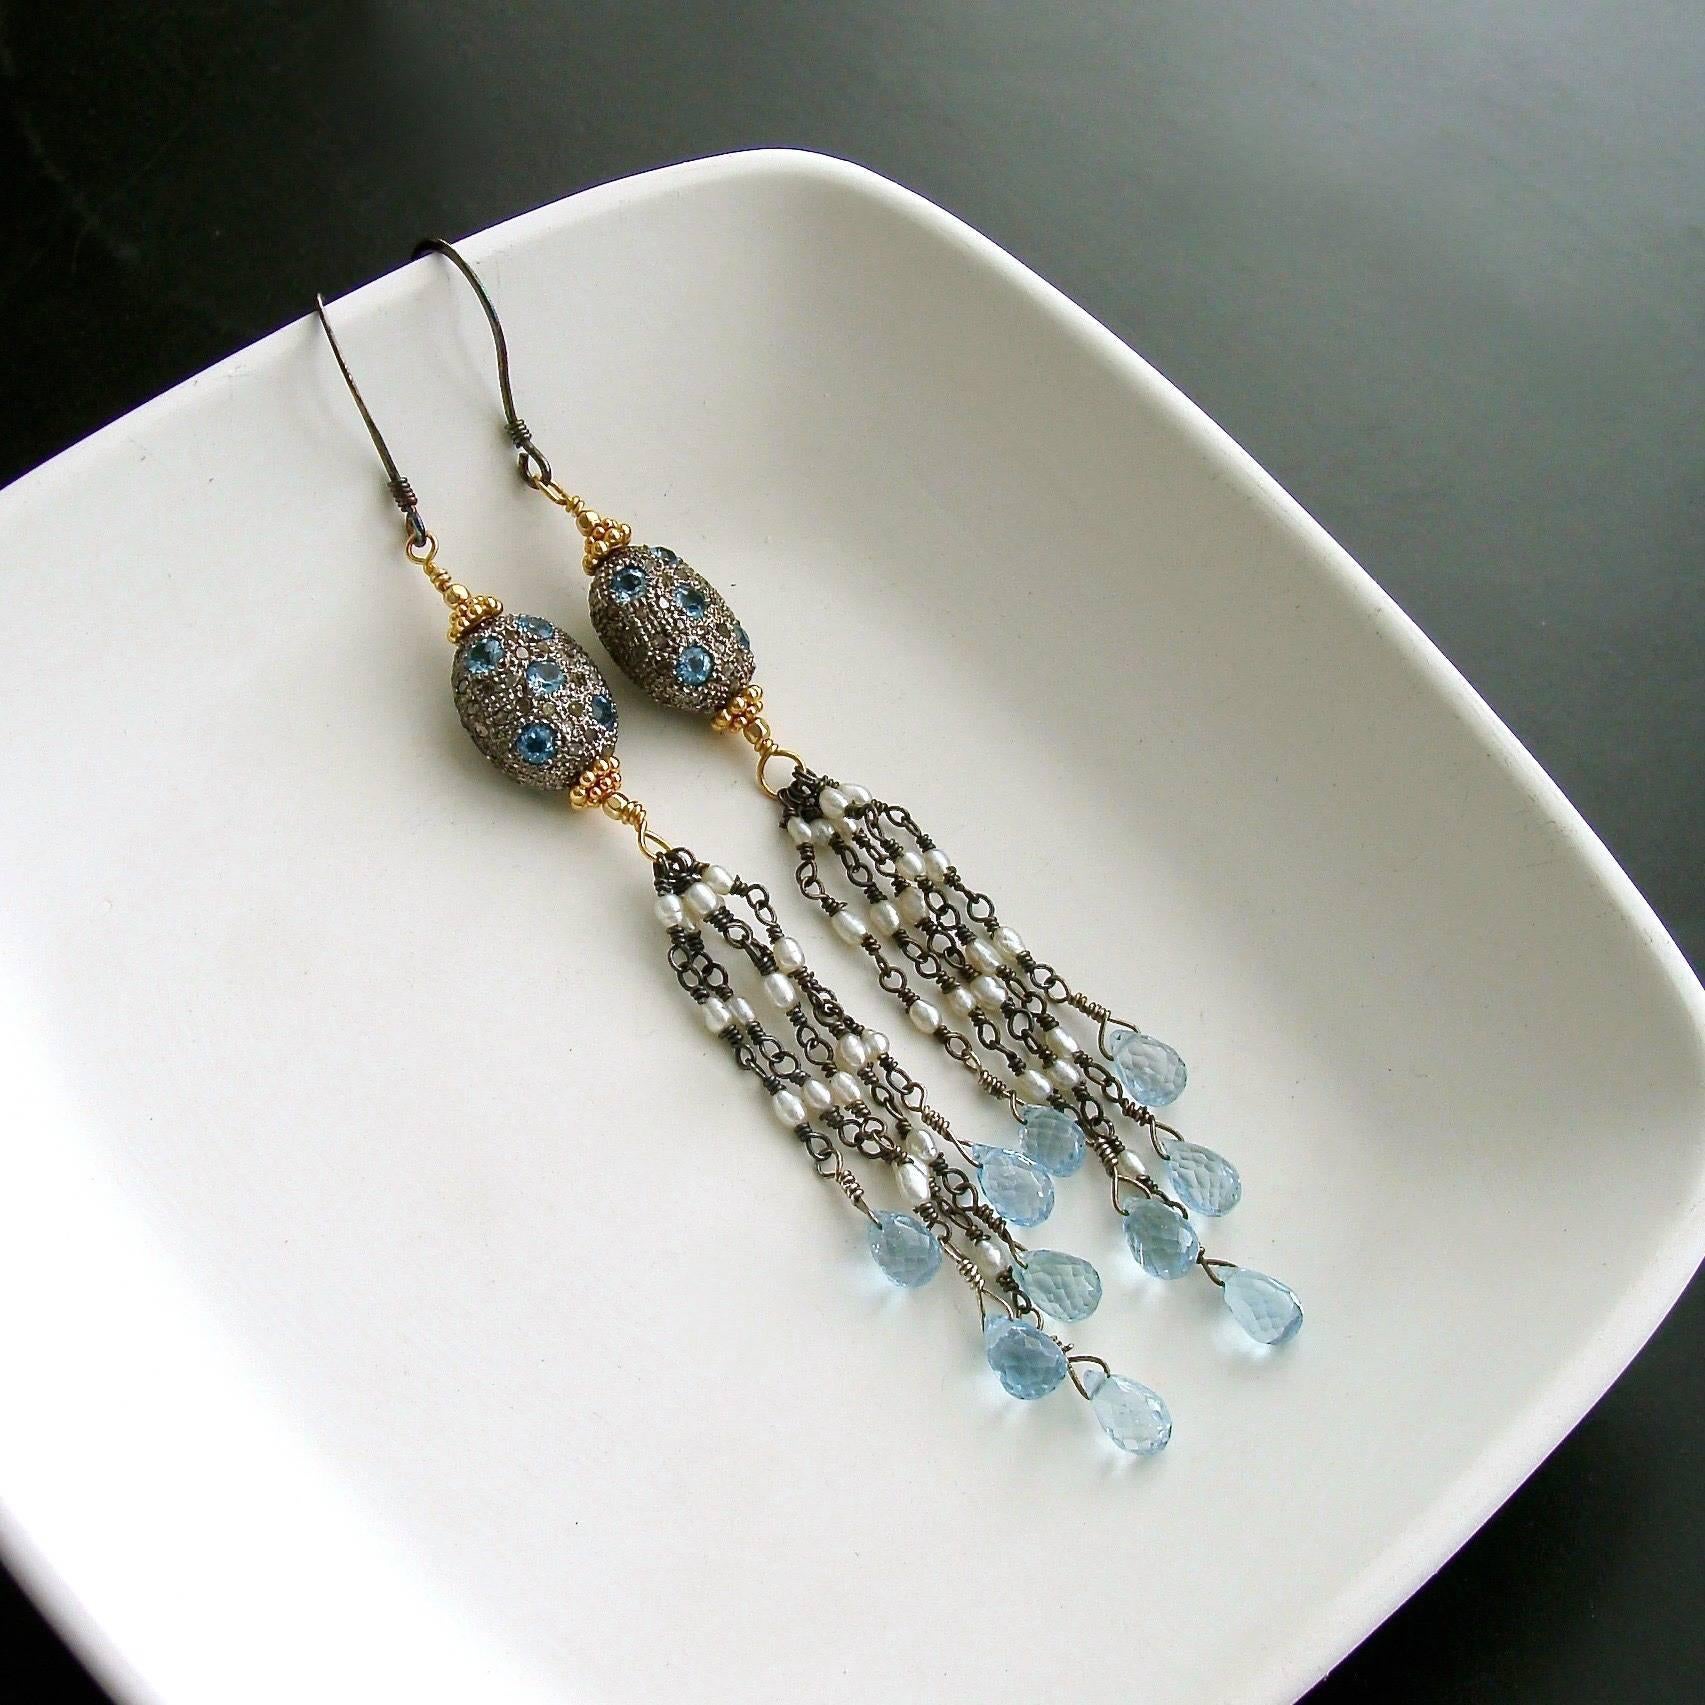 Harmonie Earrings.

Gorgeous pave diamond sterling silver beads, dotted with blue topaz have become the inspiration for these jaw dropping shoulder duster tassel earrings.  The mixed metals of the rhodium silver beads lead one’s eye to a delicate